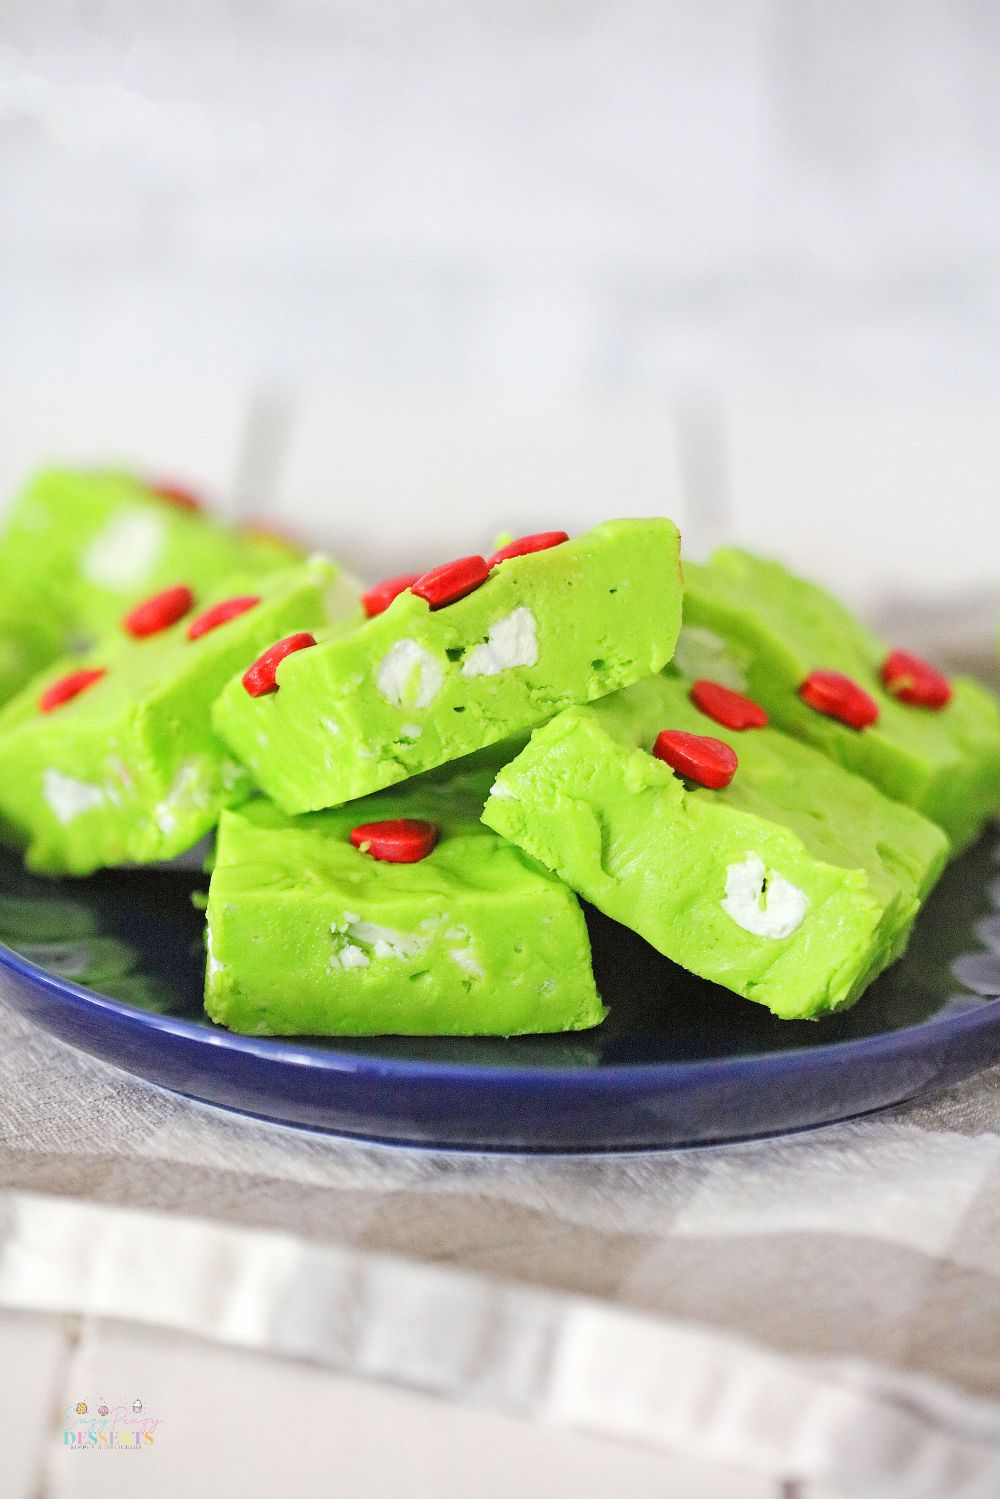 Image of green fudge for Christmas, with red hearts and white marshmallows